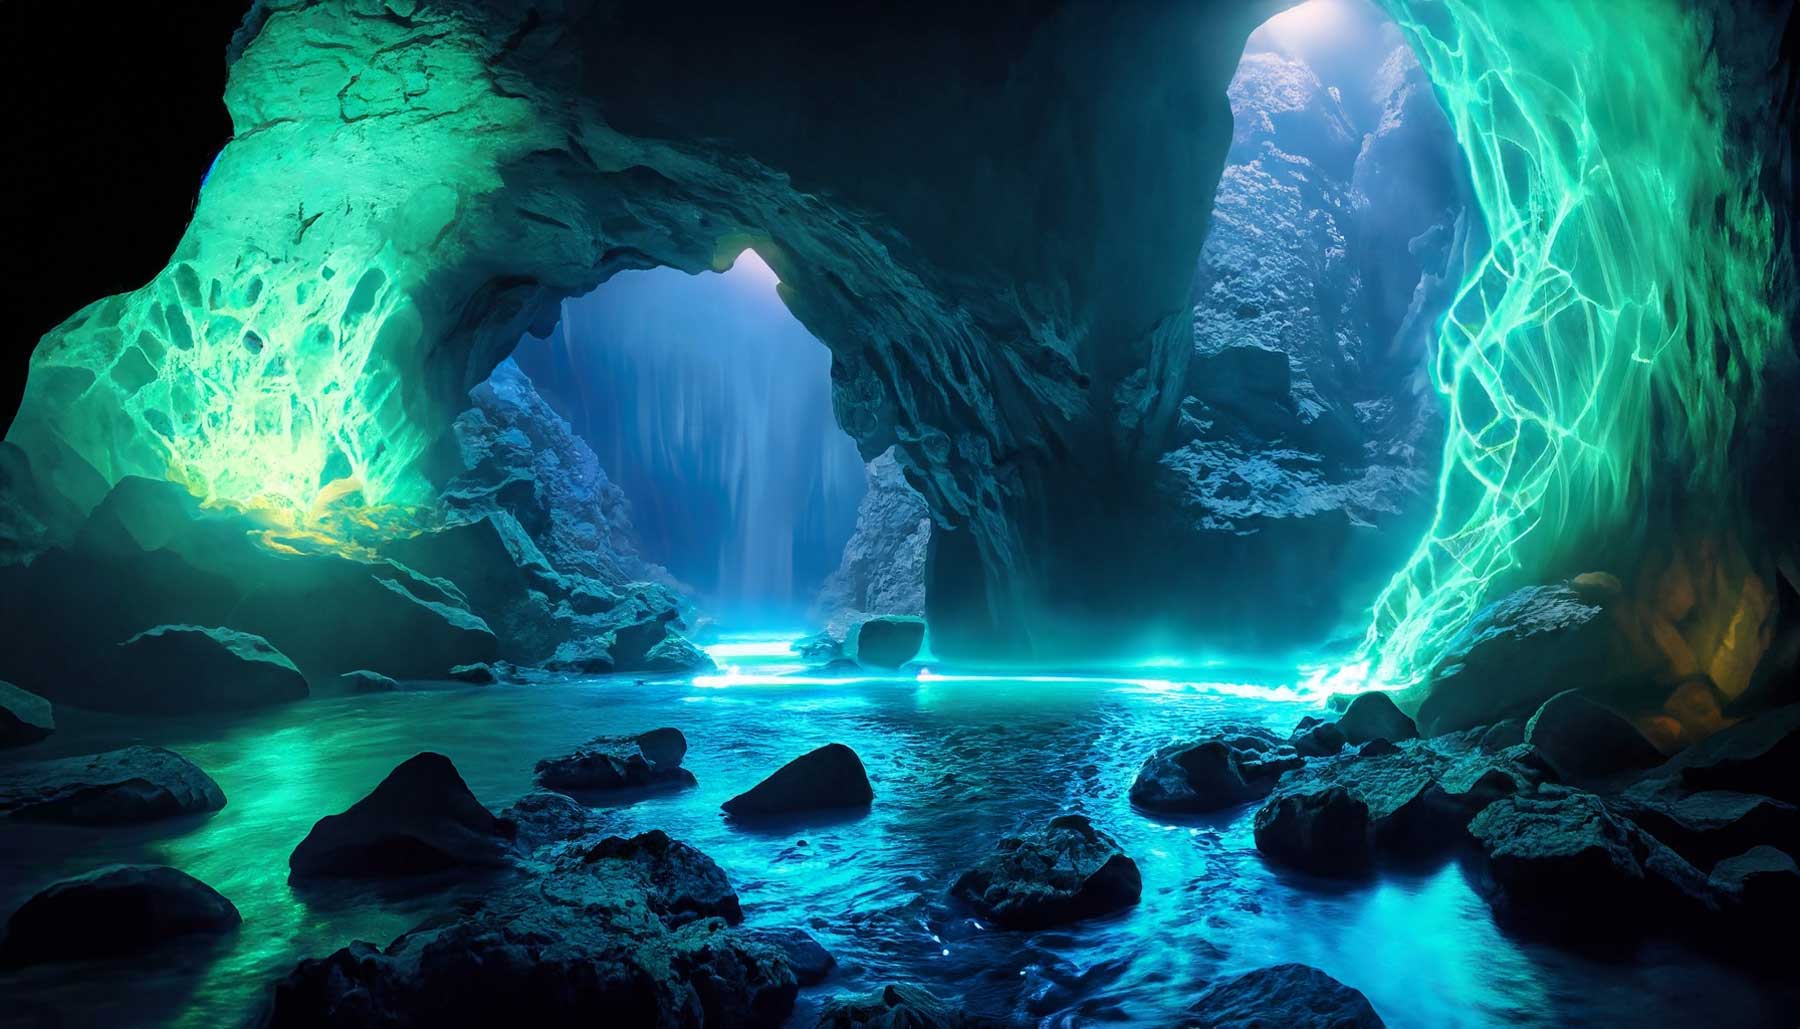 glowing river in a cave